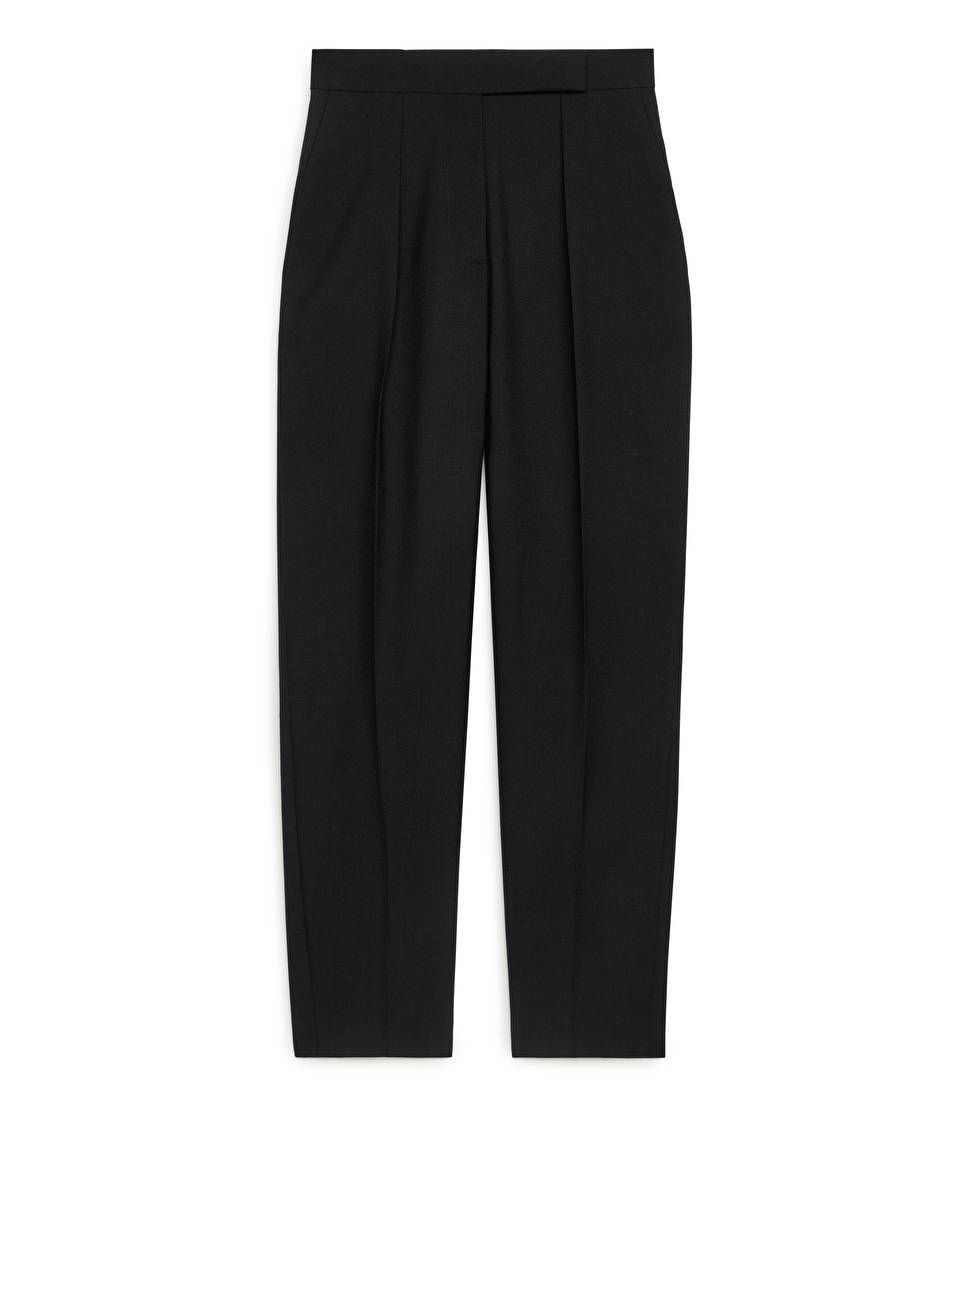 Tailored Wool Trousers | ARKET